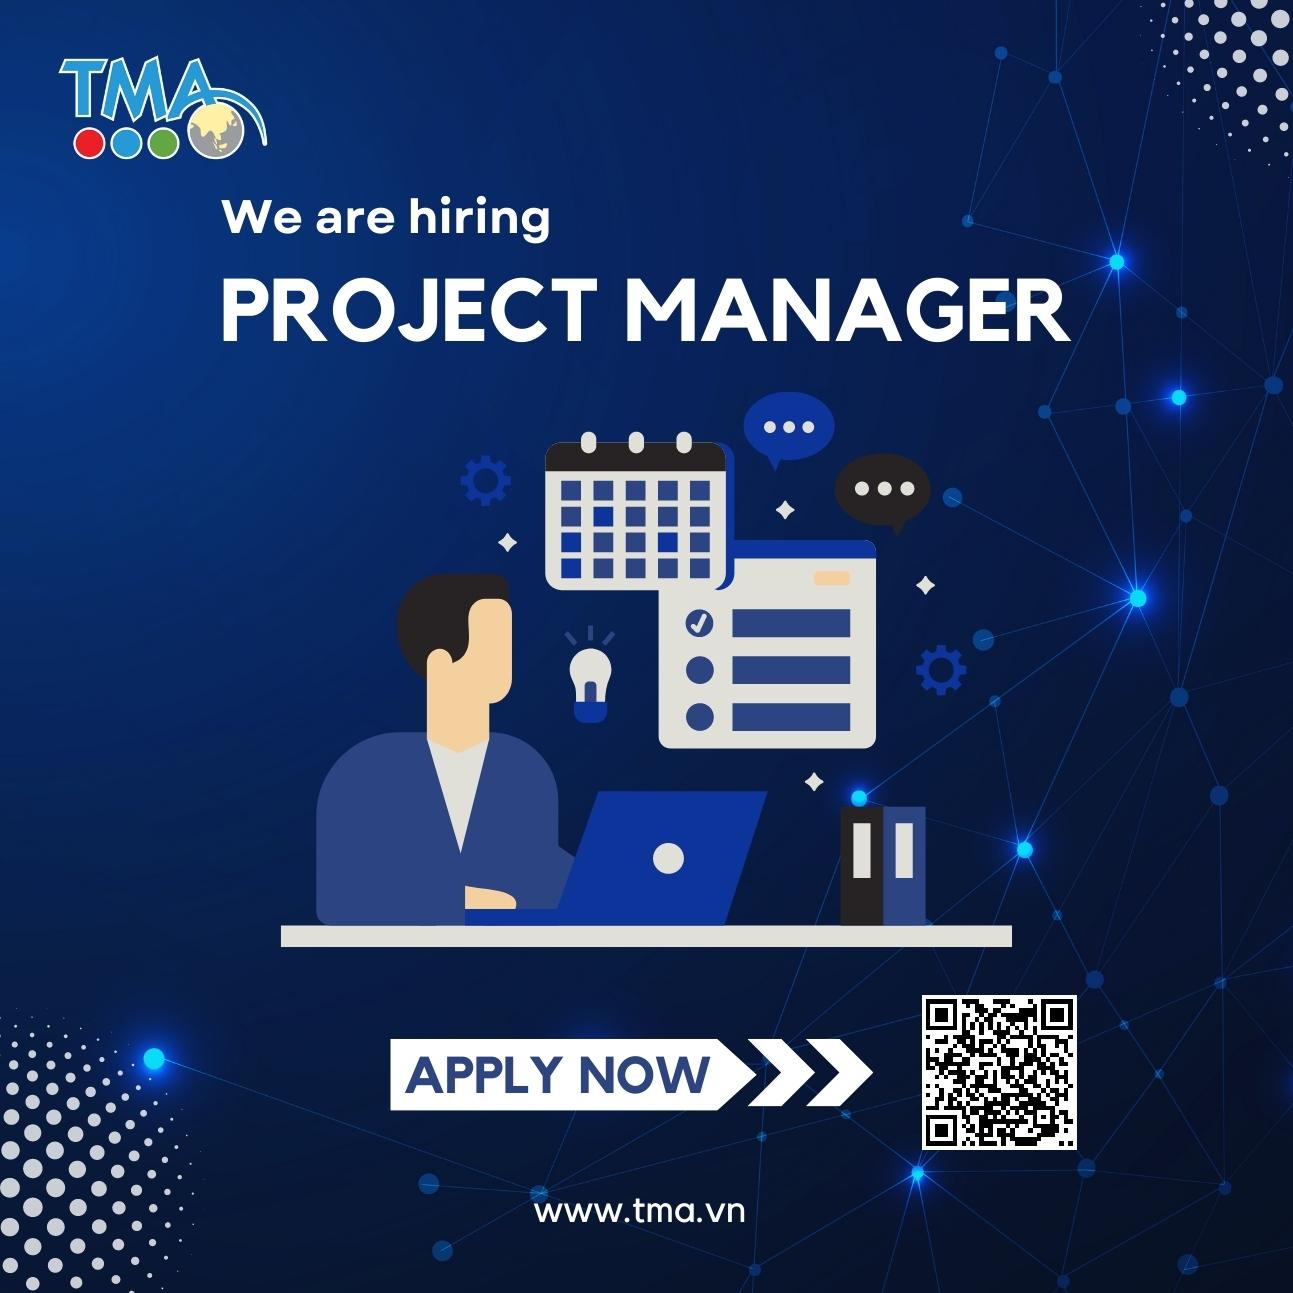 TMA is hiring Project Manager